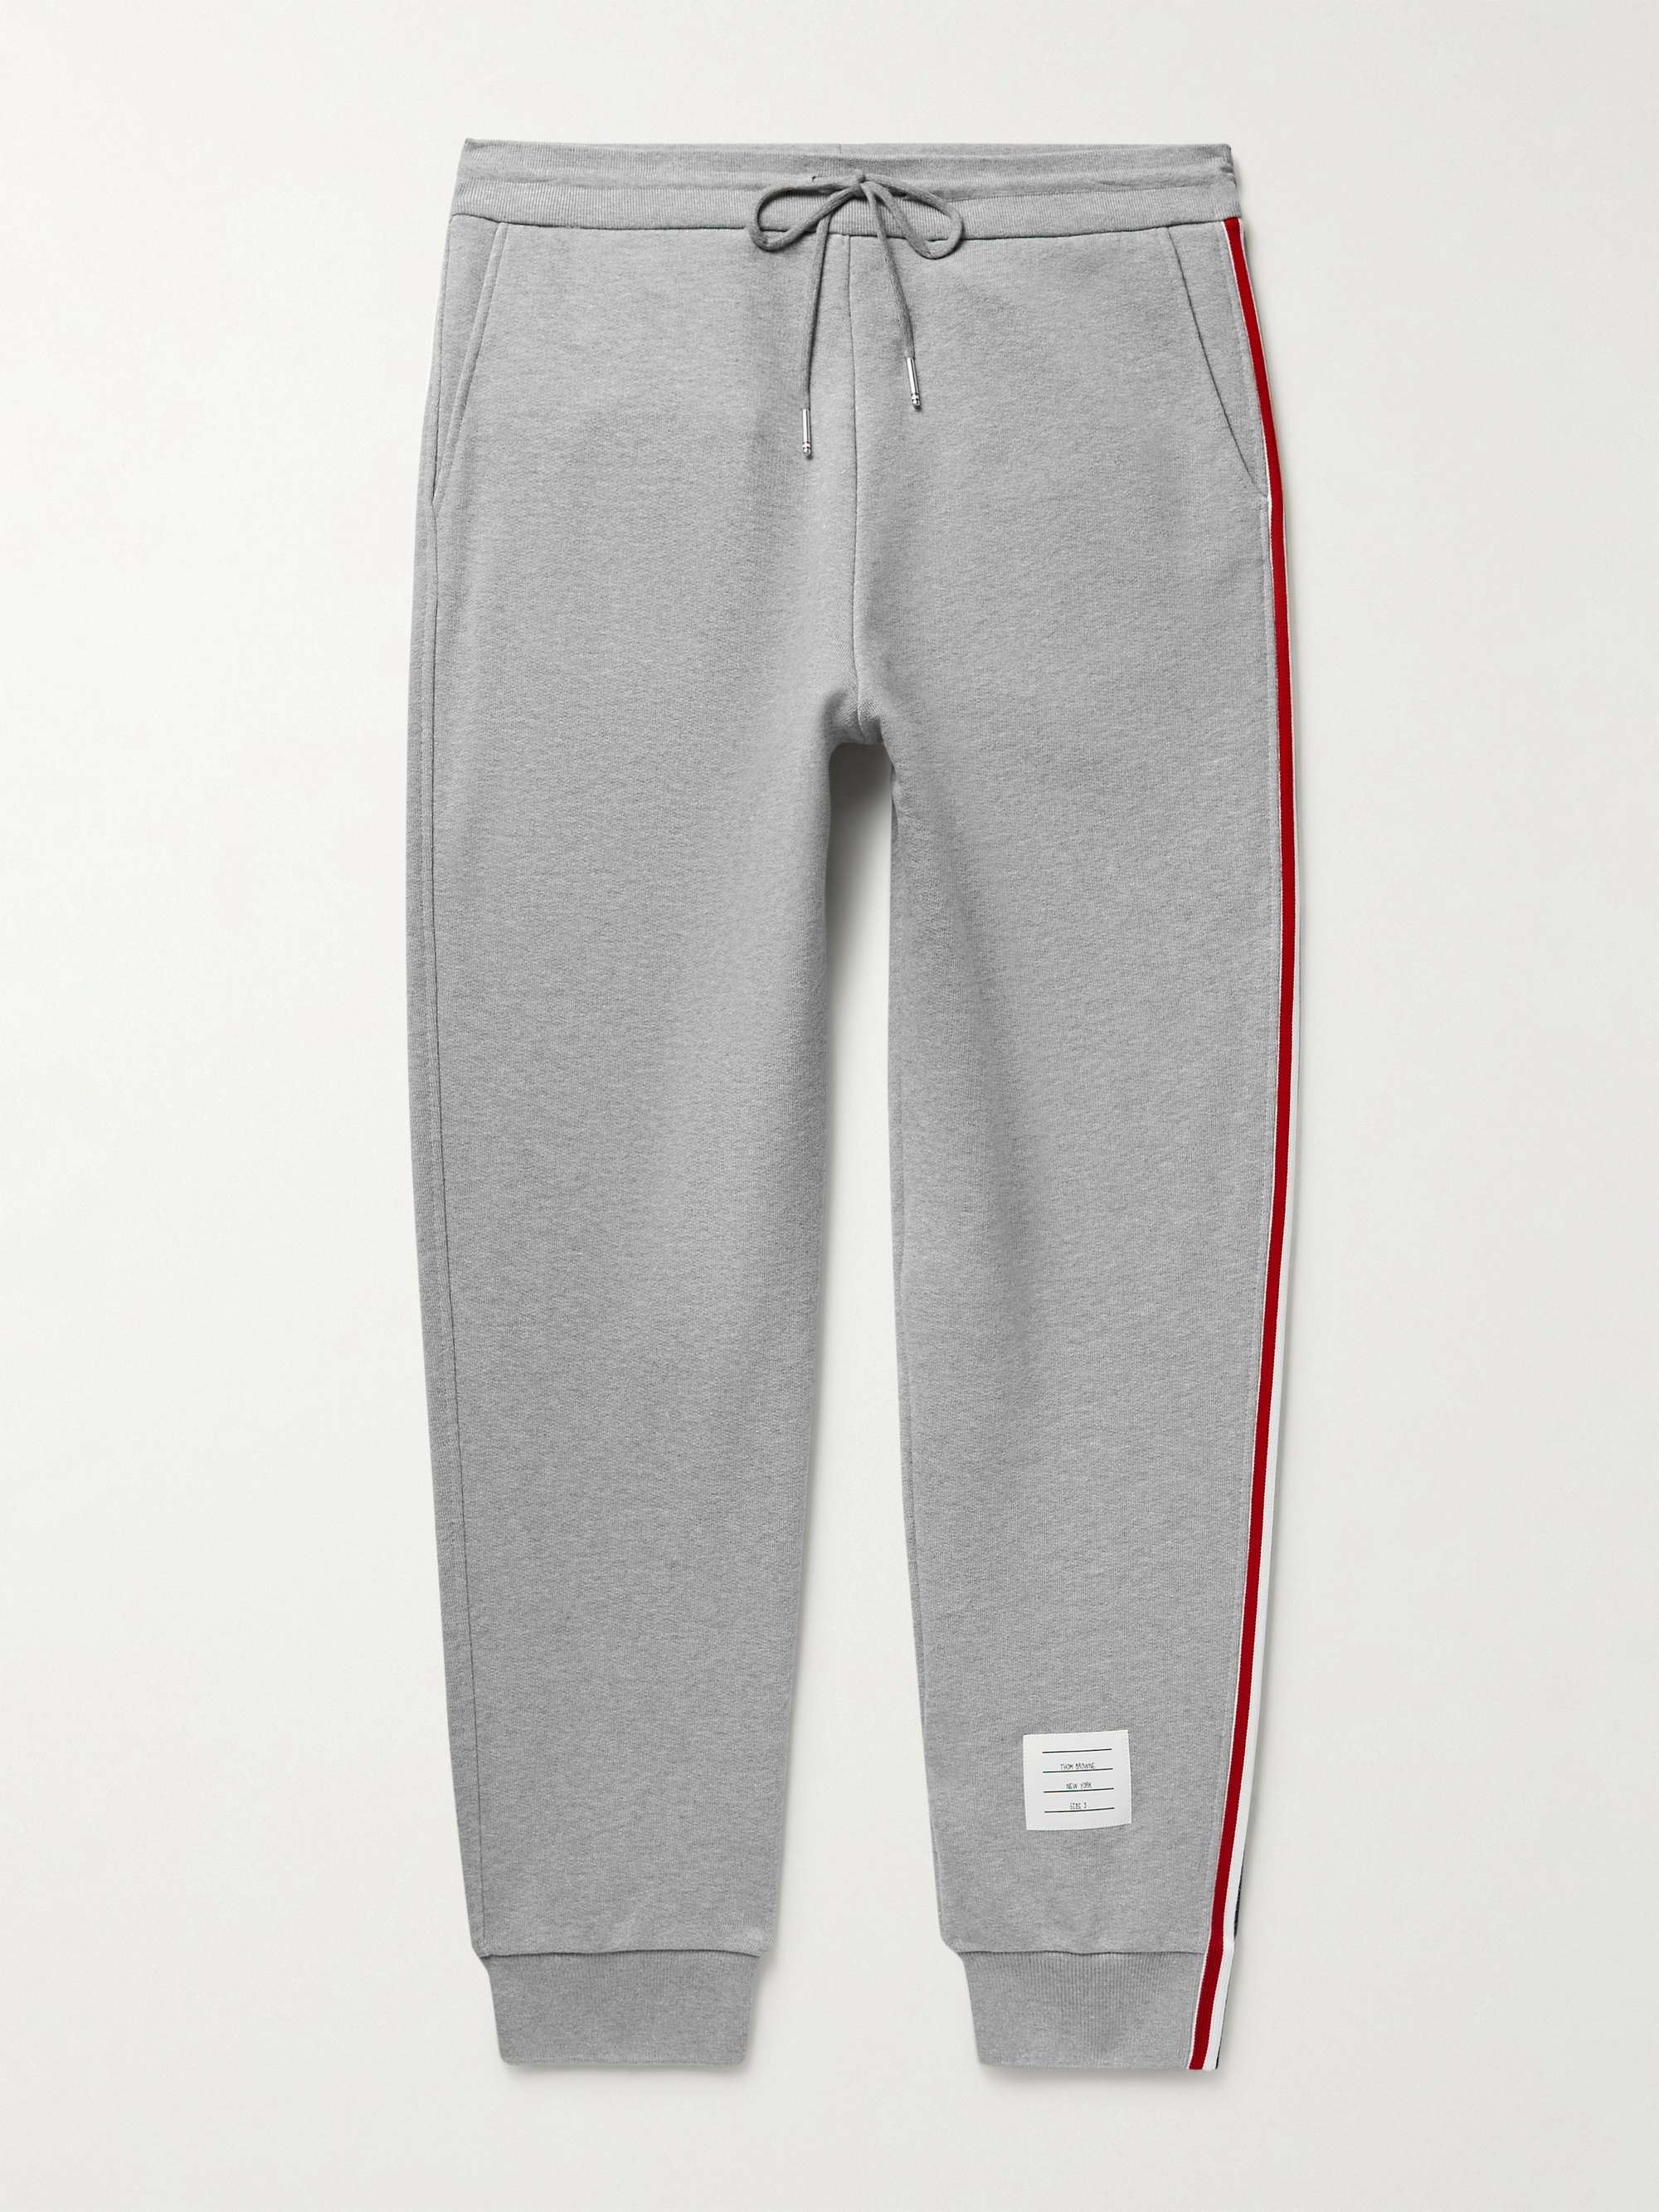 THOM BROWNE Tapered Grosgrain-Trimmed Cotton-Jersey Sweatpants